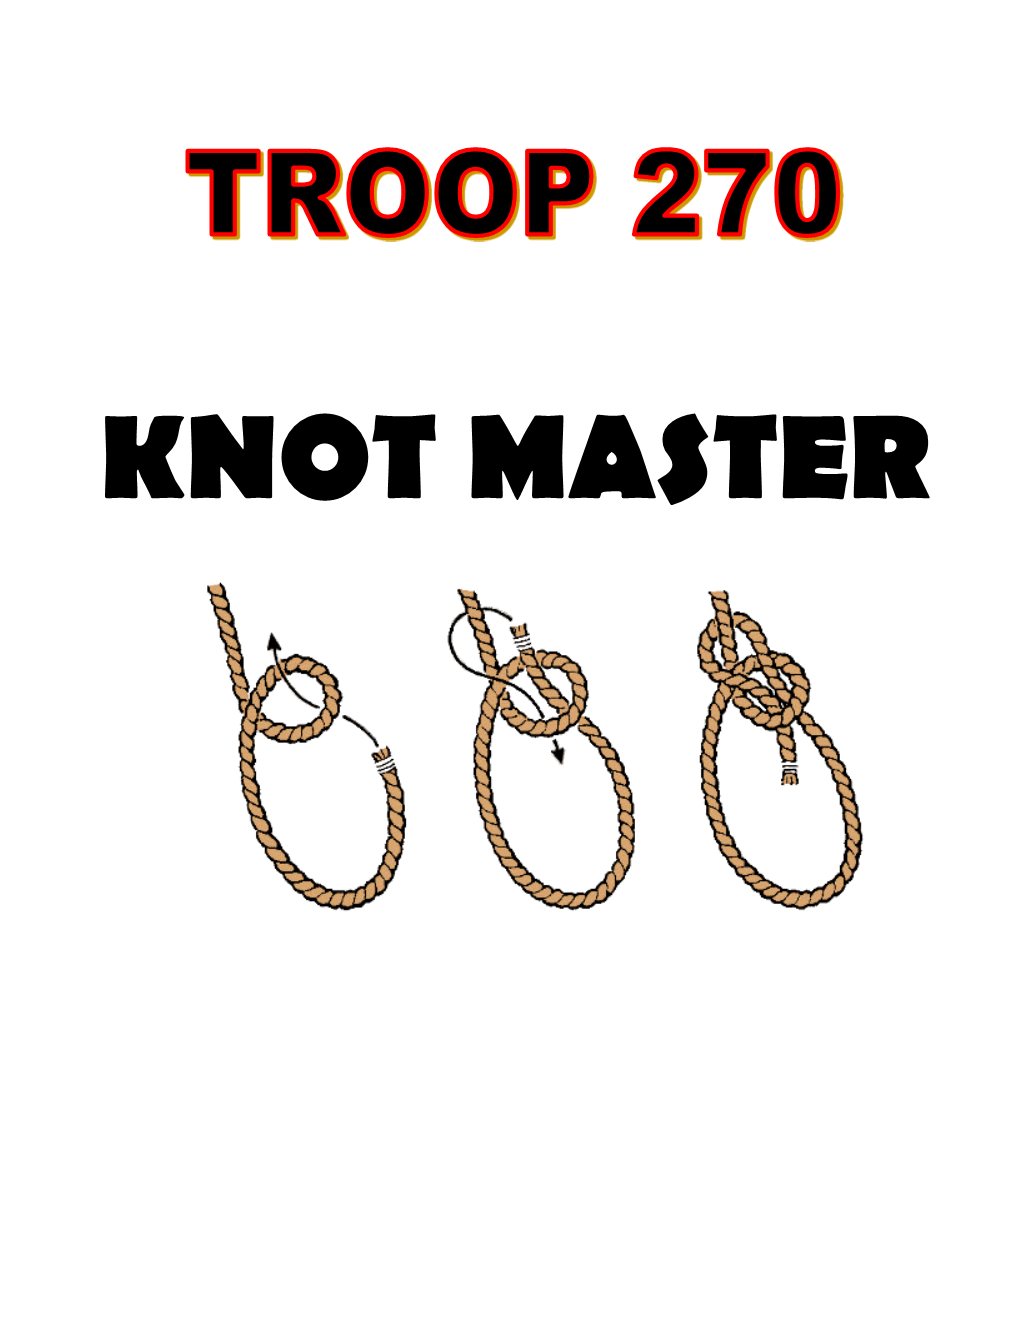 Knot Master Program” Is Designed to Provide Each Scout an Opportunity to Learn Essential Knots, As Well As the Fun Knots That You Can Use to Amaze Your Friends